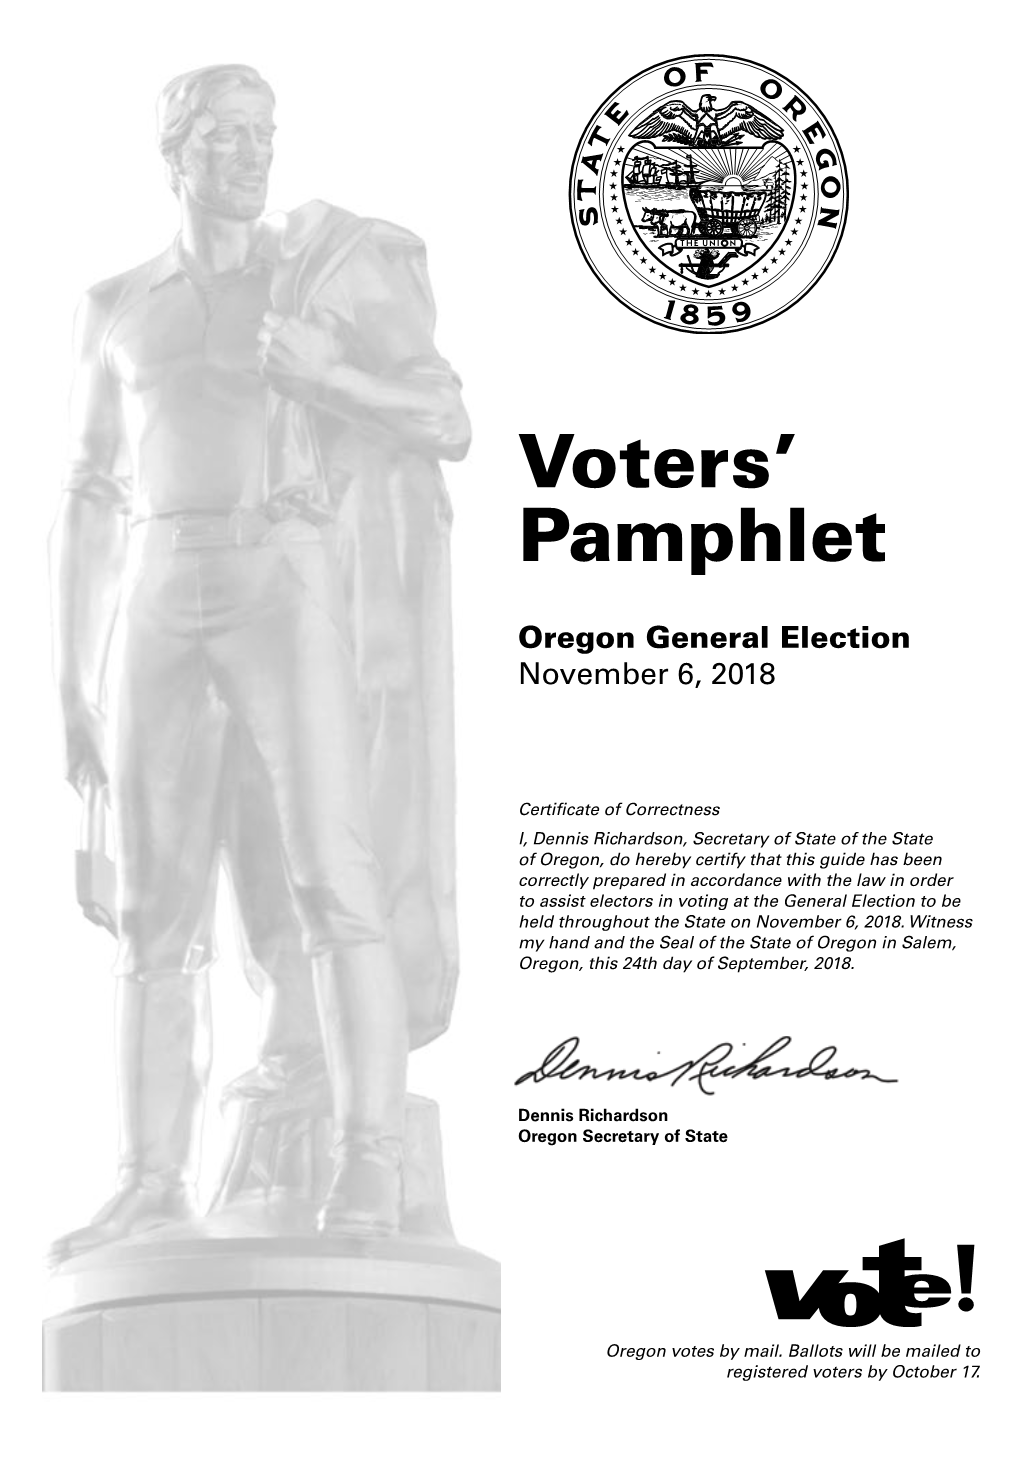 State Voters' Pamphlet ﬁlings